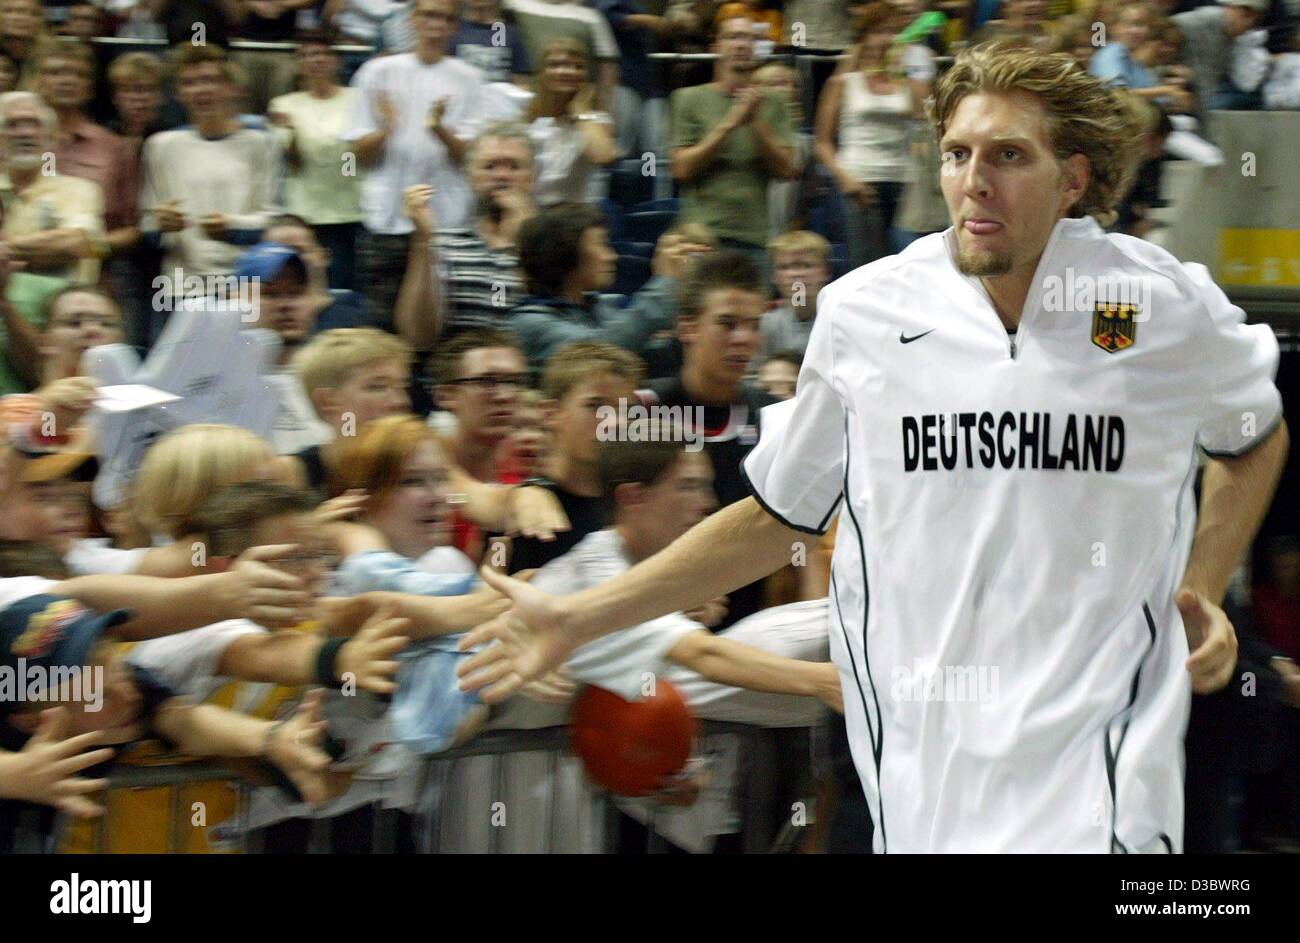 (dpa) - Germany's basketball player Dirk Nowitzki wearing the Germany tricot runs along the gym past his fans ahead of the Supercup game opposing Germany and France in Brunswick, Germany, 24 August 2003. France wins the game 76-68. The Supercup 2003 is a tournament between France, Croatia, Sweden an Stock Photo